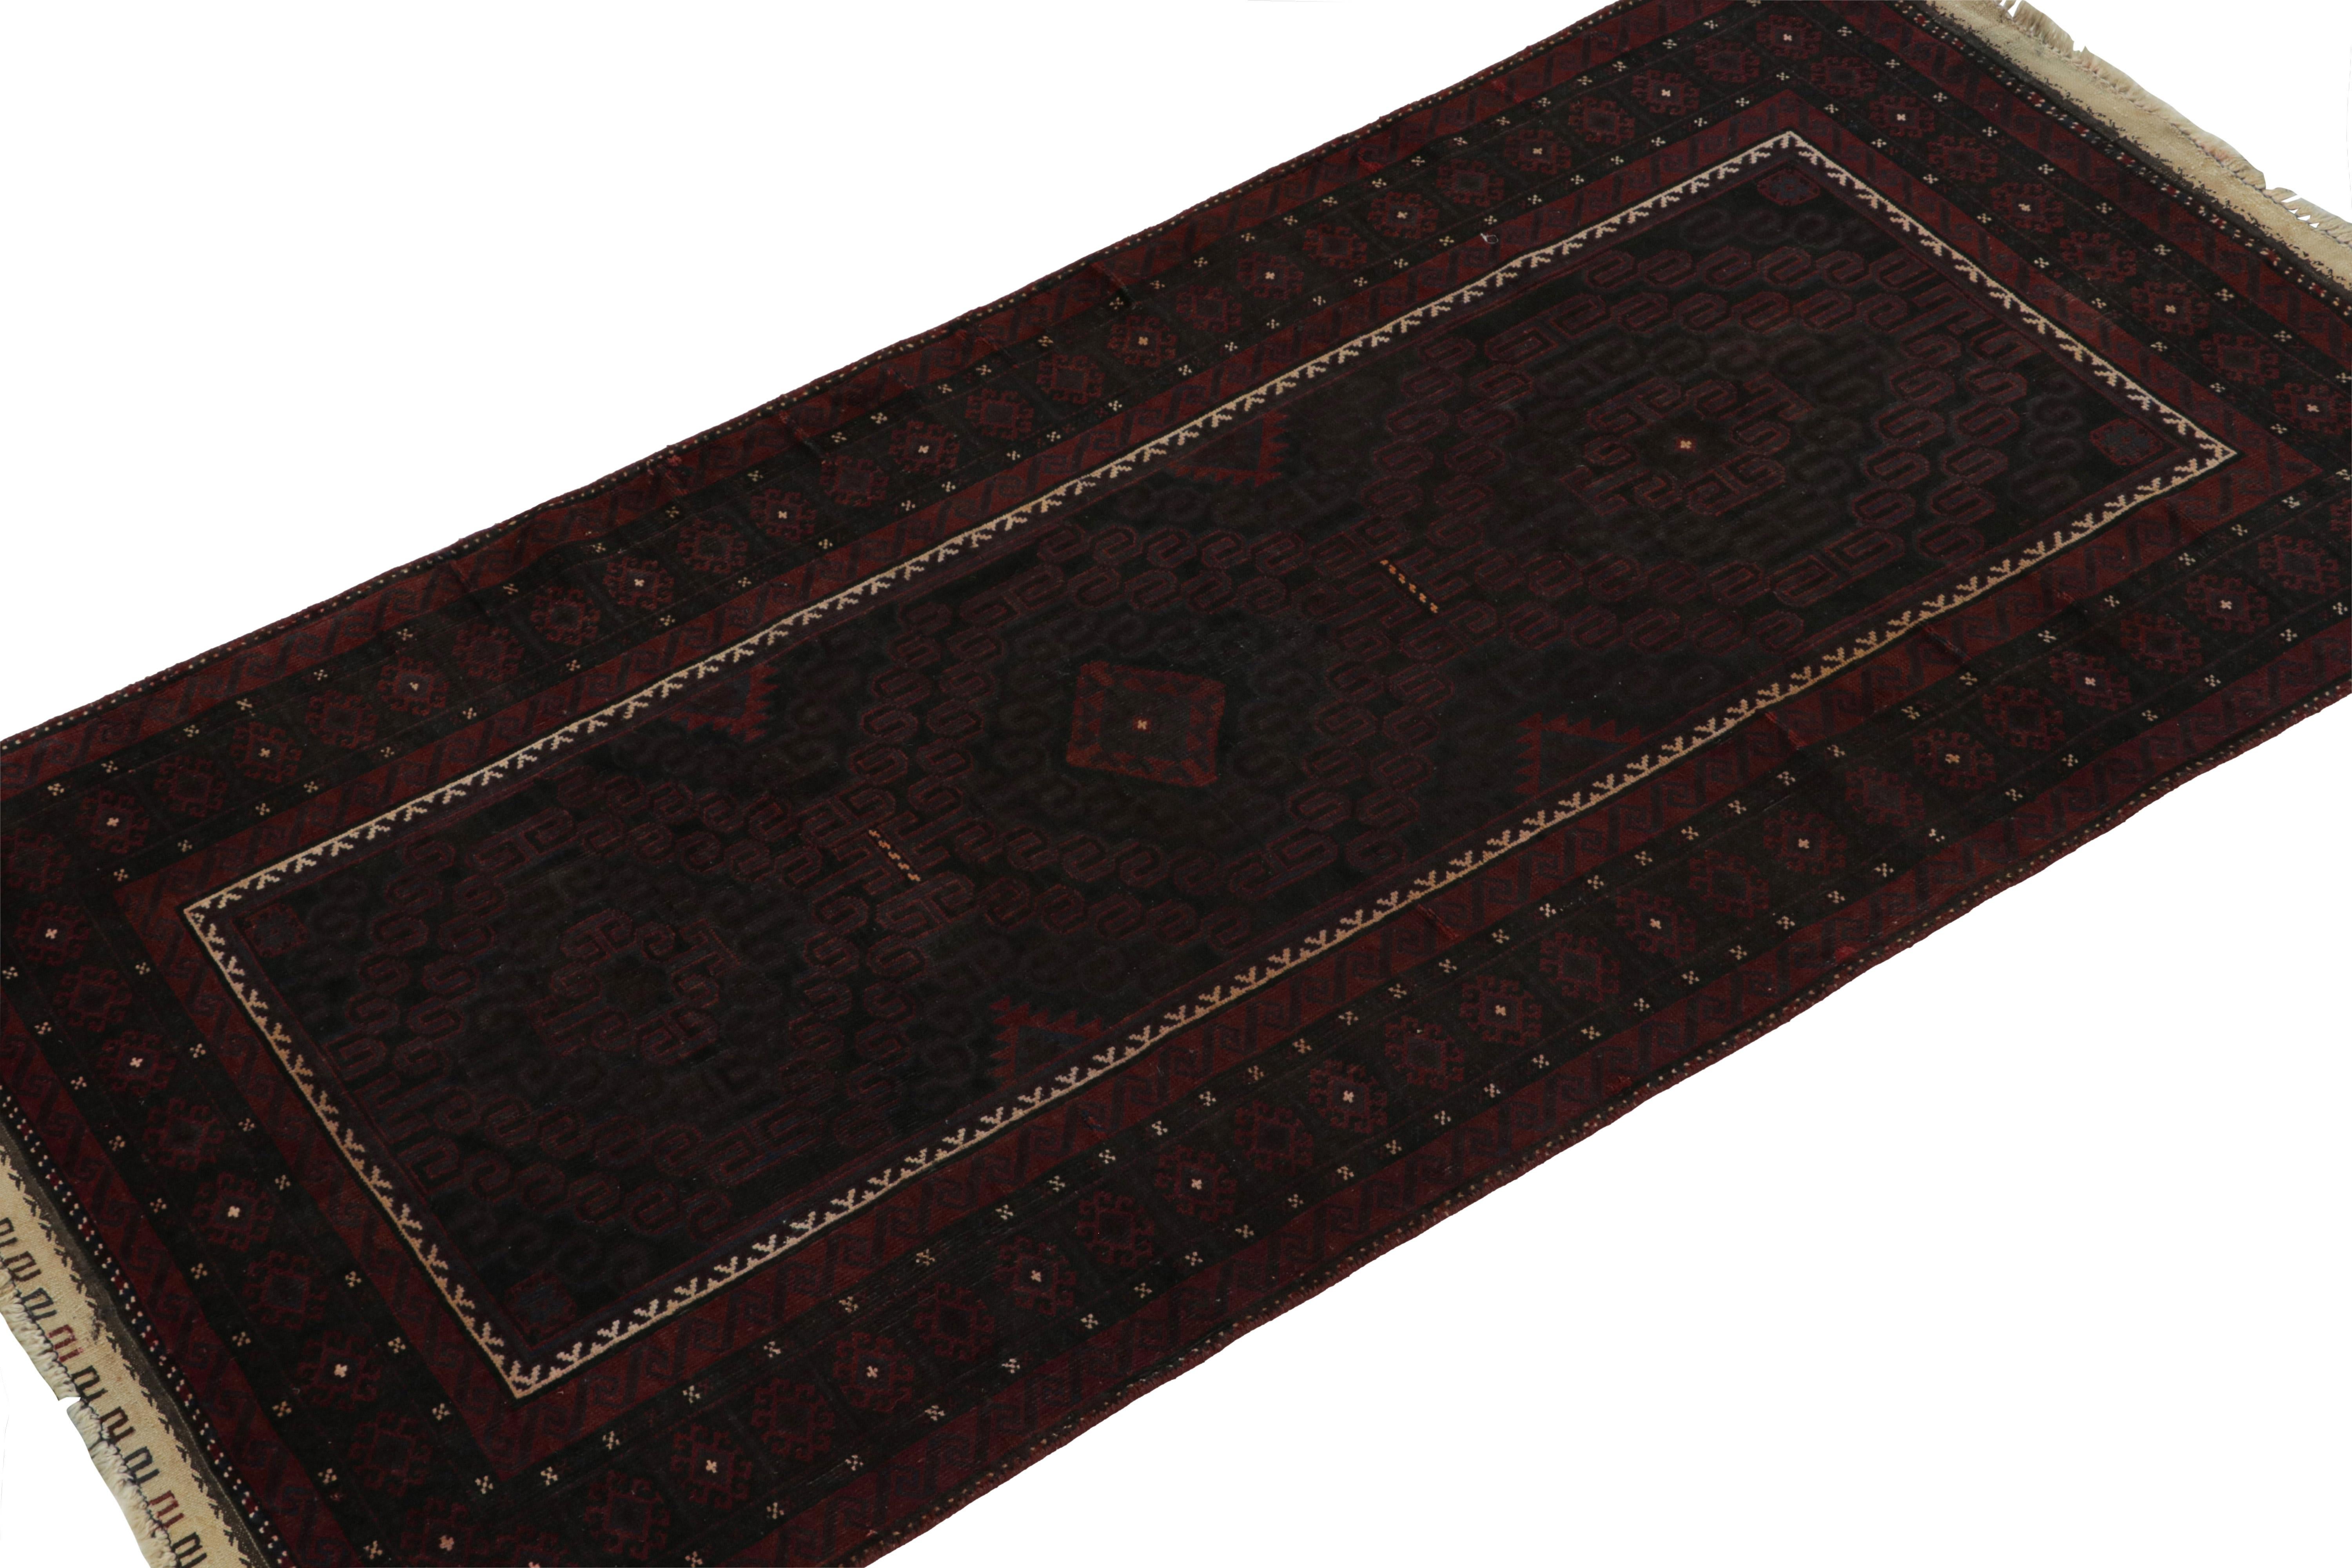 Hand-knotted in wool and goat hair circa 1950-1960, this 3x7 vintage tribal runner is a Baluch rug from new curations in the Rug & Kilim collection.

On the Design: 

This runner rug enjoys rich, saturated colors in maroon and navy blue, with black